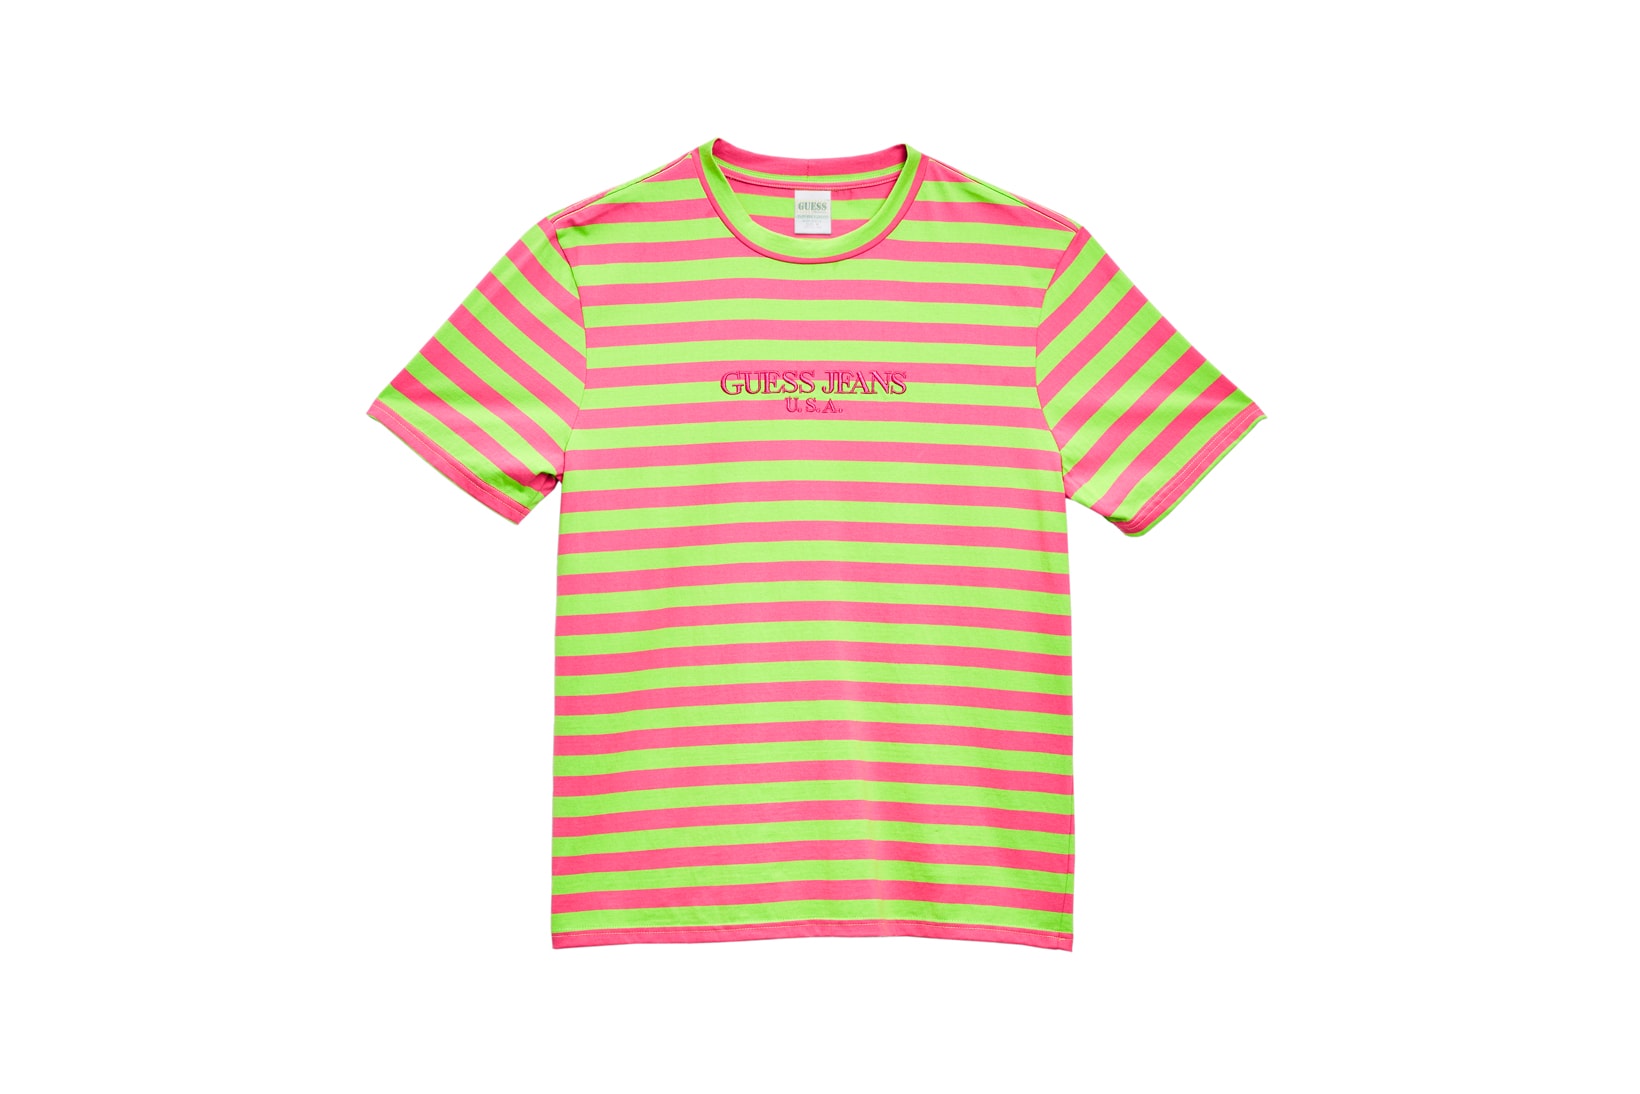 GUESS Jeans U.S.A. Farmers Market Capsule Collection Striped T-Shirt Green Pink